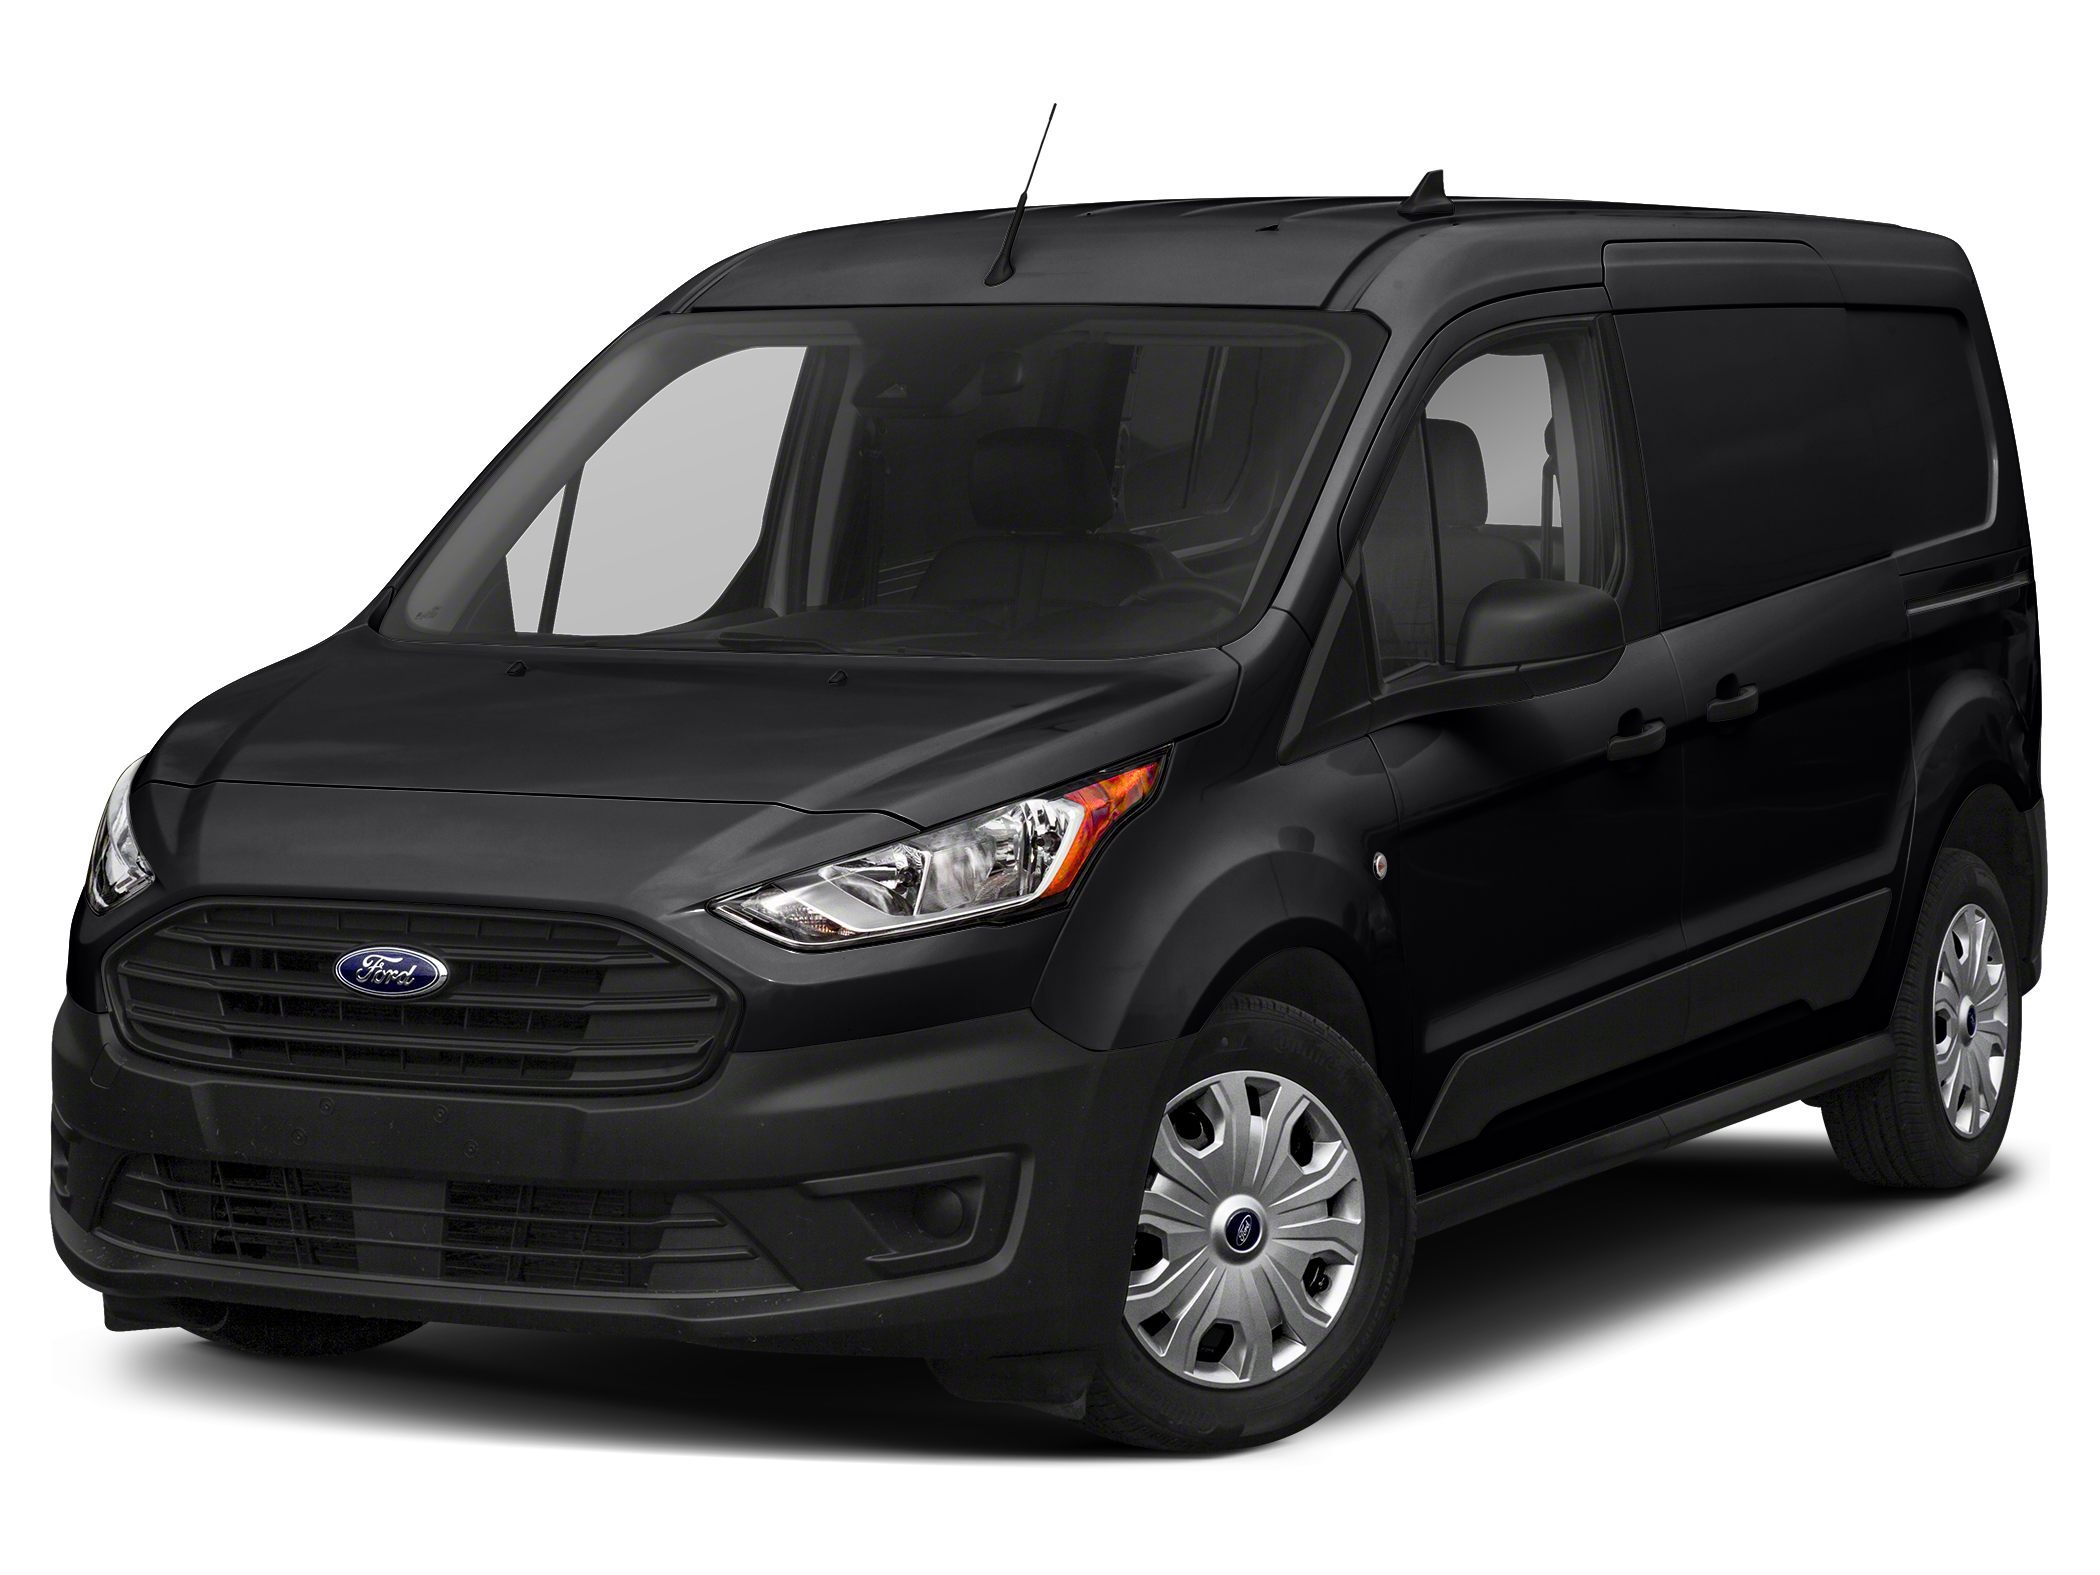 Used 2019 Ford Transit Connect For Sale at Flood Lincoln of